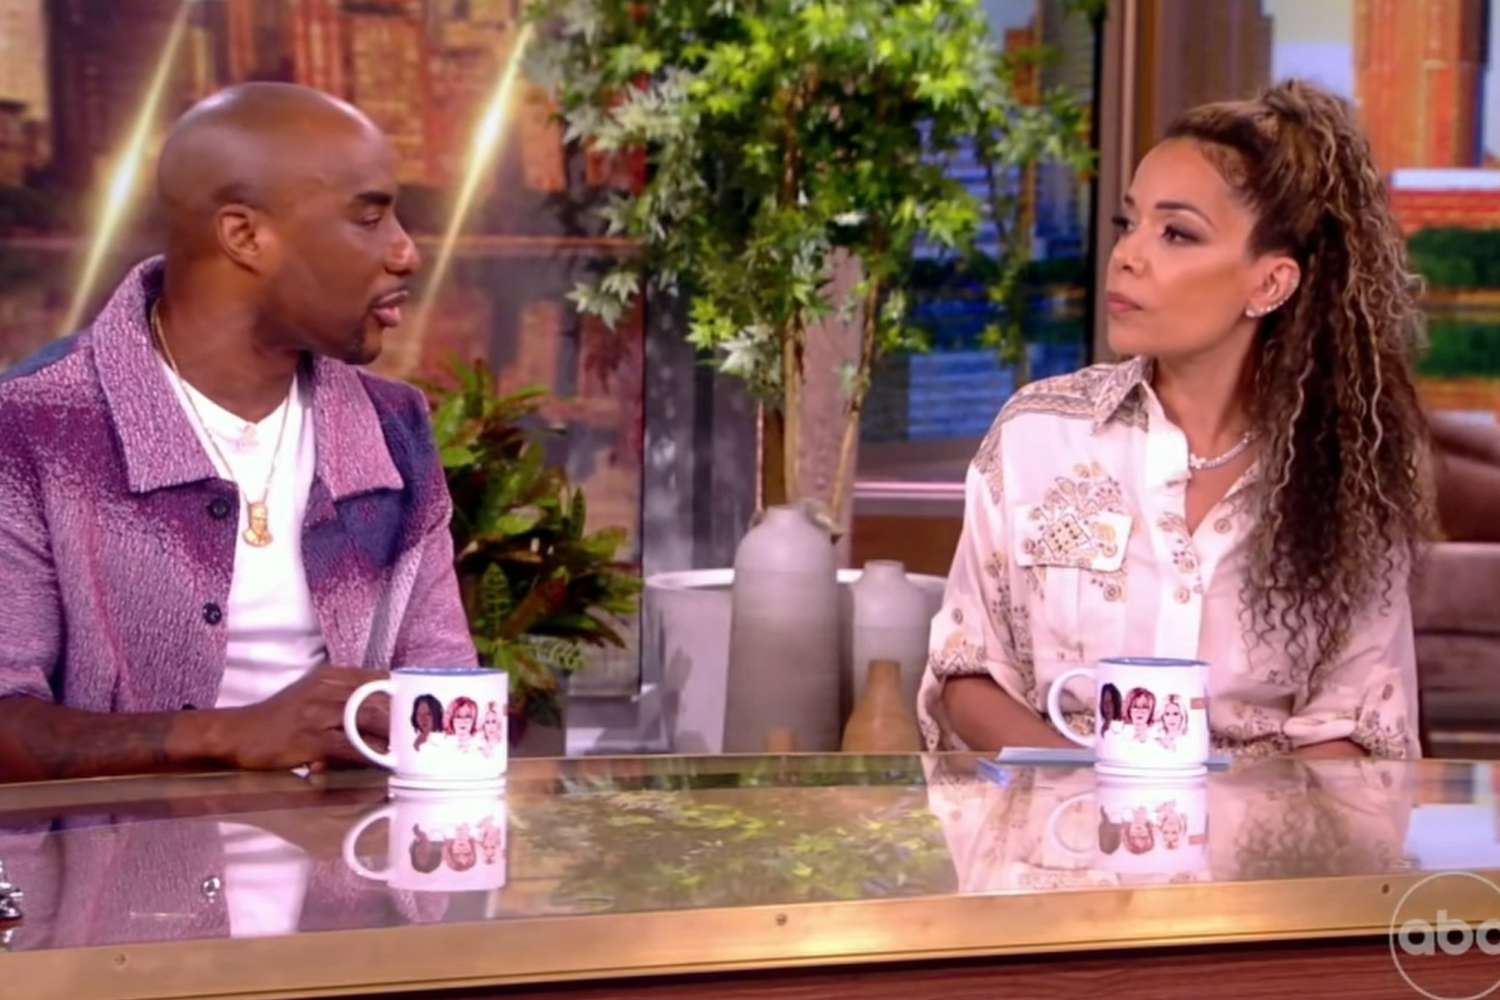 Charlamagne Tha God calls out 'The View' during tense live interview